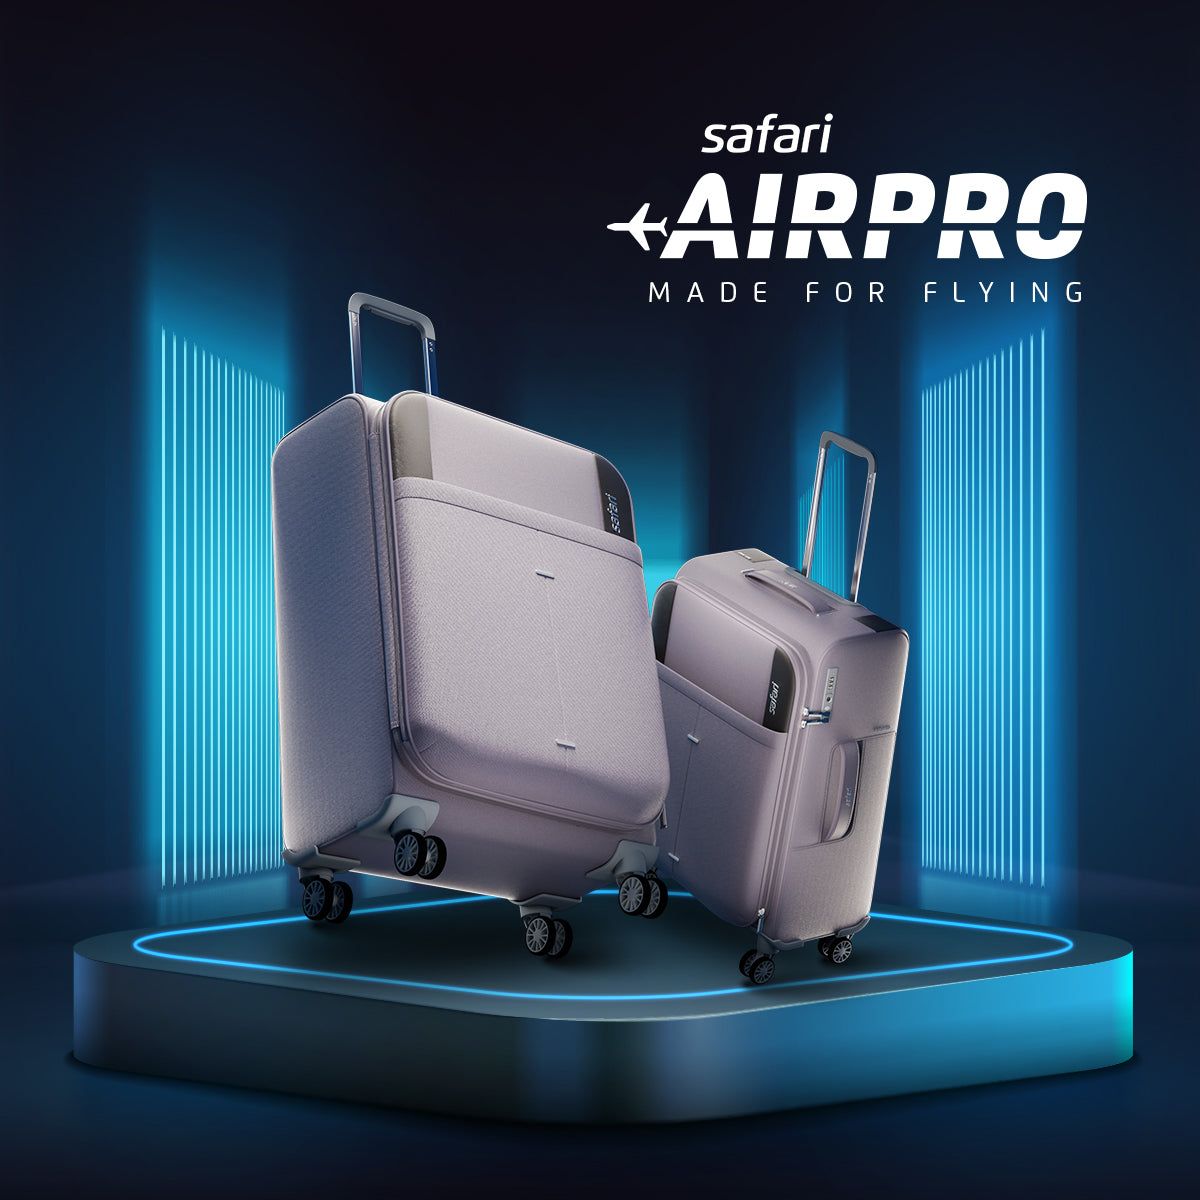 Airpro 40% Lighter Soft Luggage with TSA Lock, Dual Wheels, Detailed interiors and Expander Combo (Small, Medium and Large) - Grey